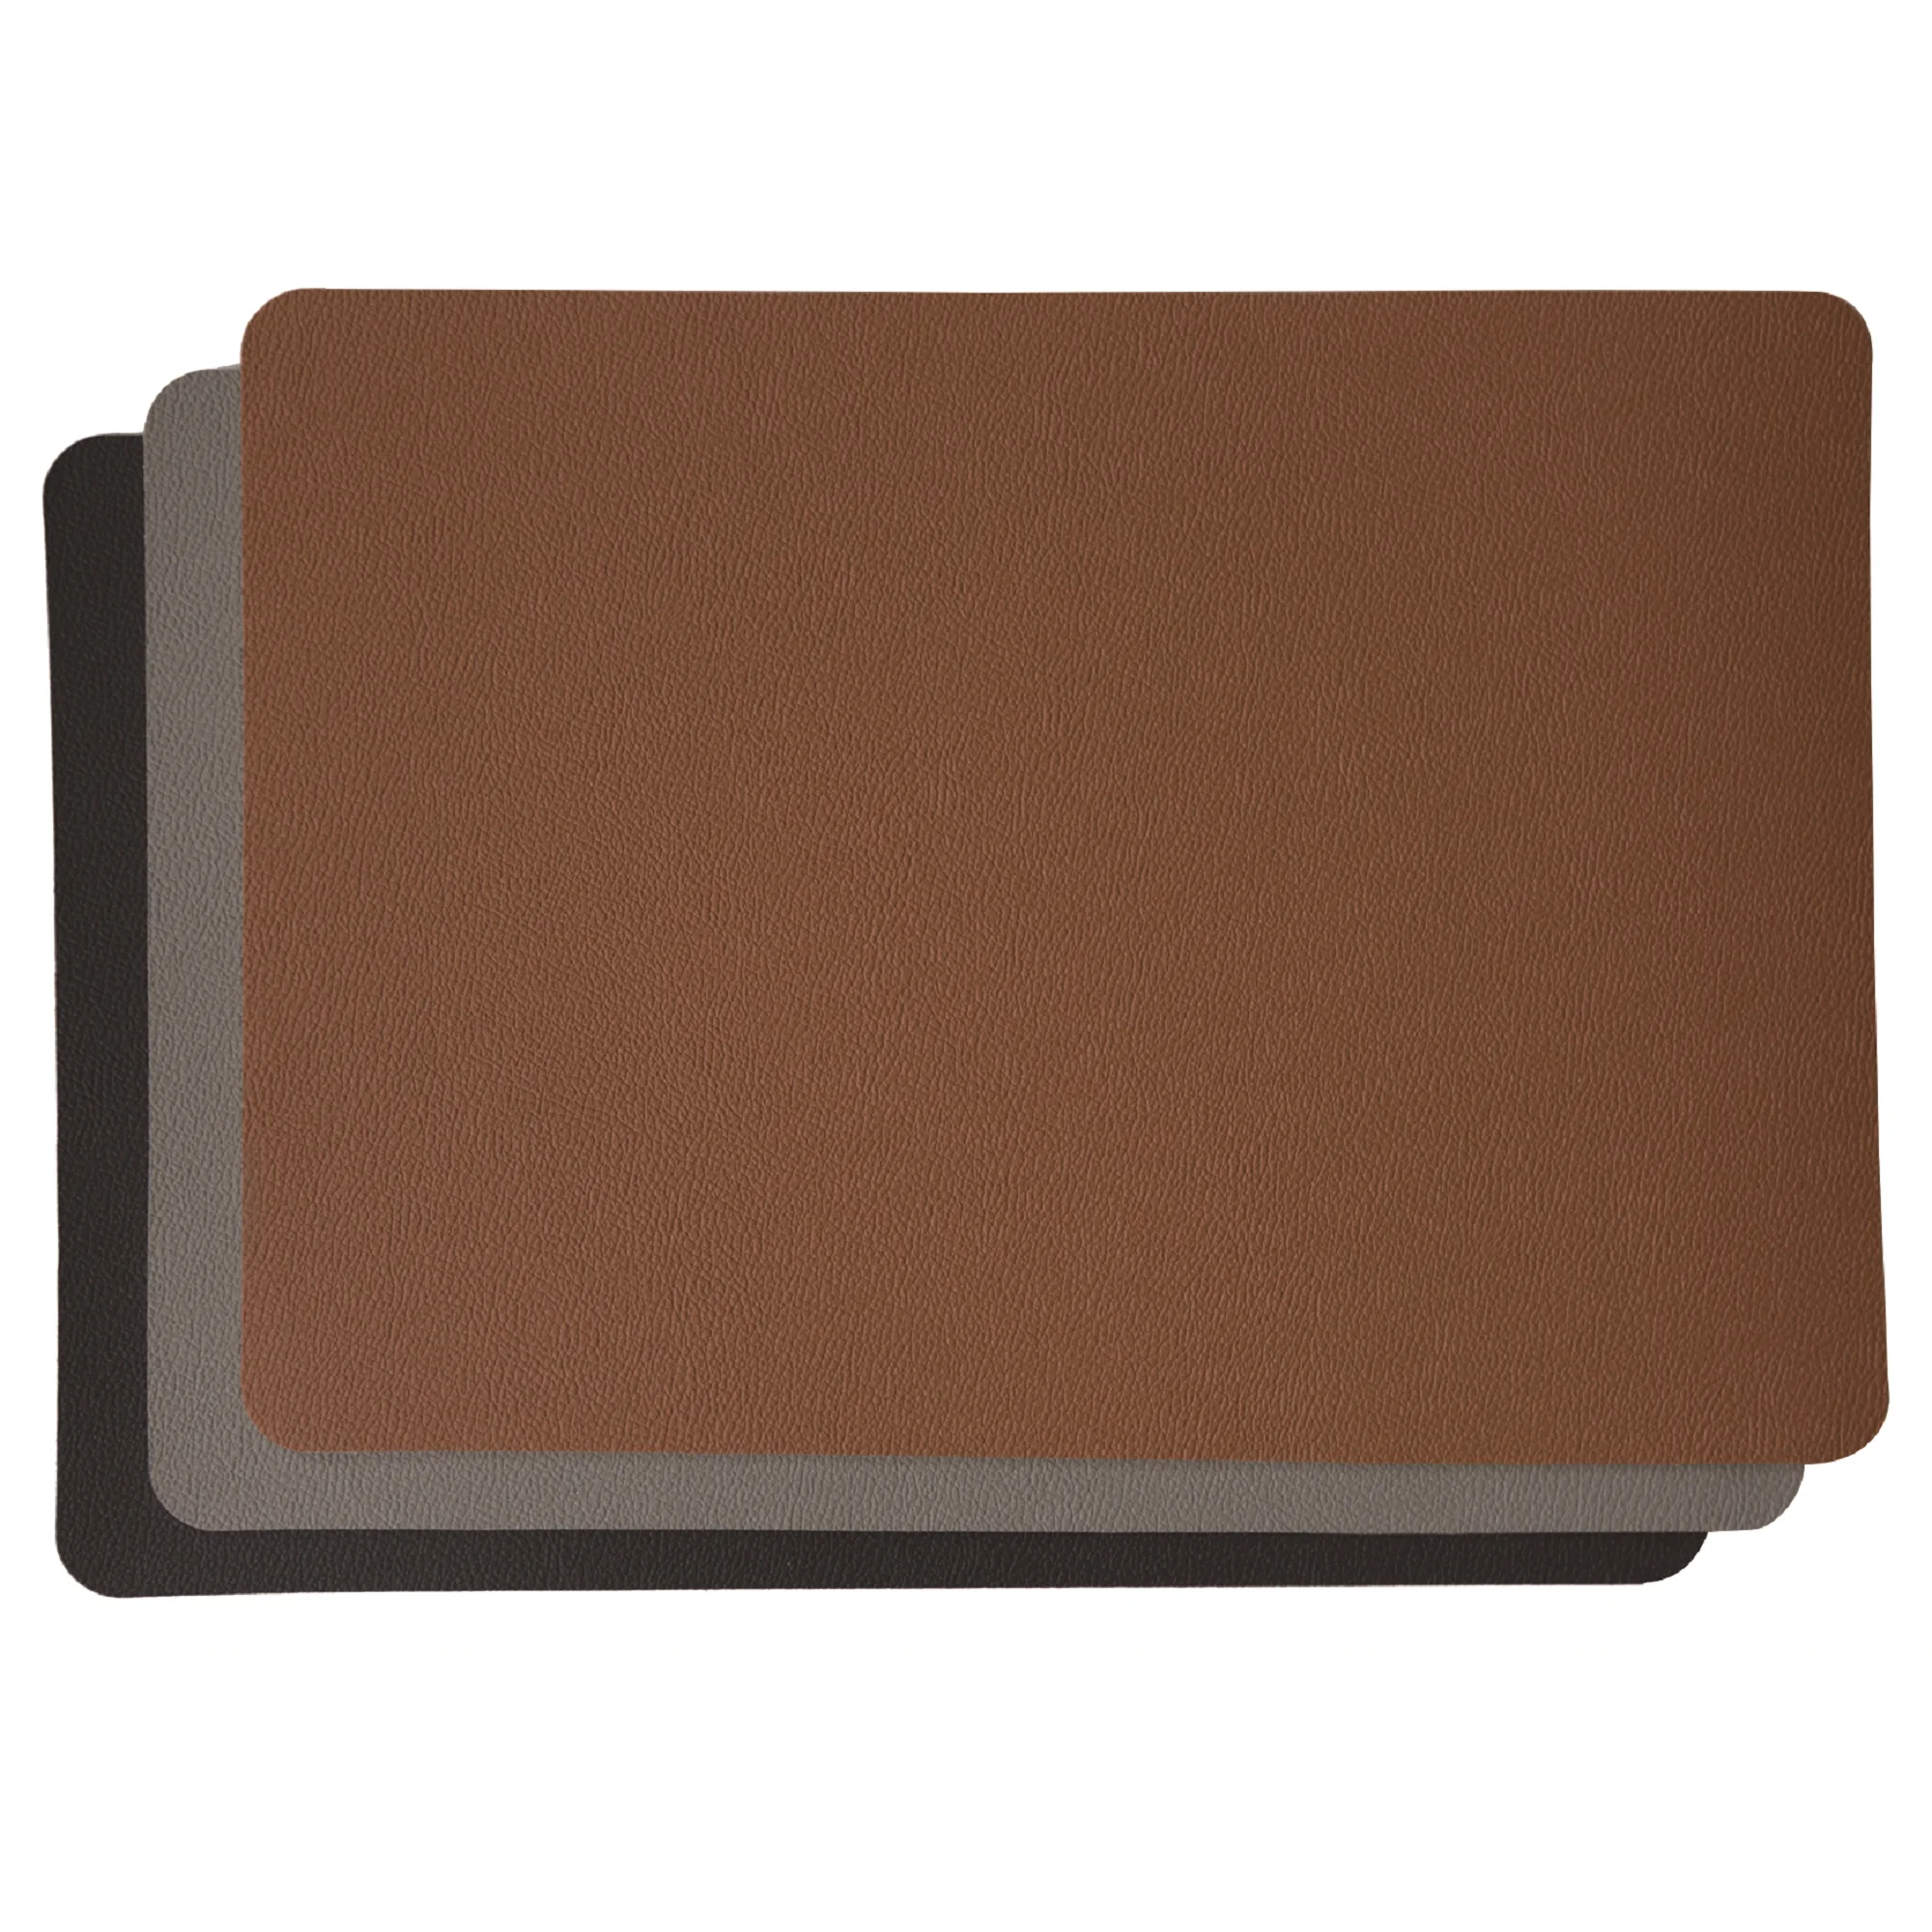 

Tabletex Double Sided PU Faux Leather Rose gold PVC Placemats and Coaster, Brown +black,dark bule +light grey;pink +dark grey;off white+brown